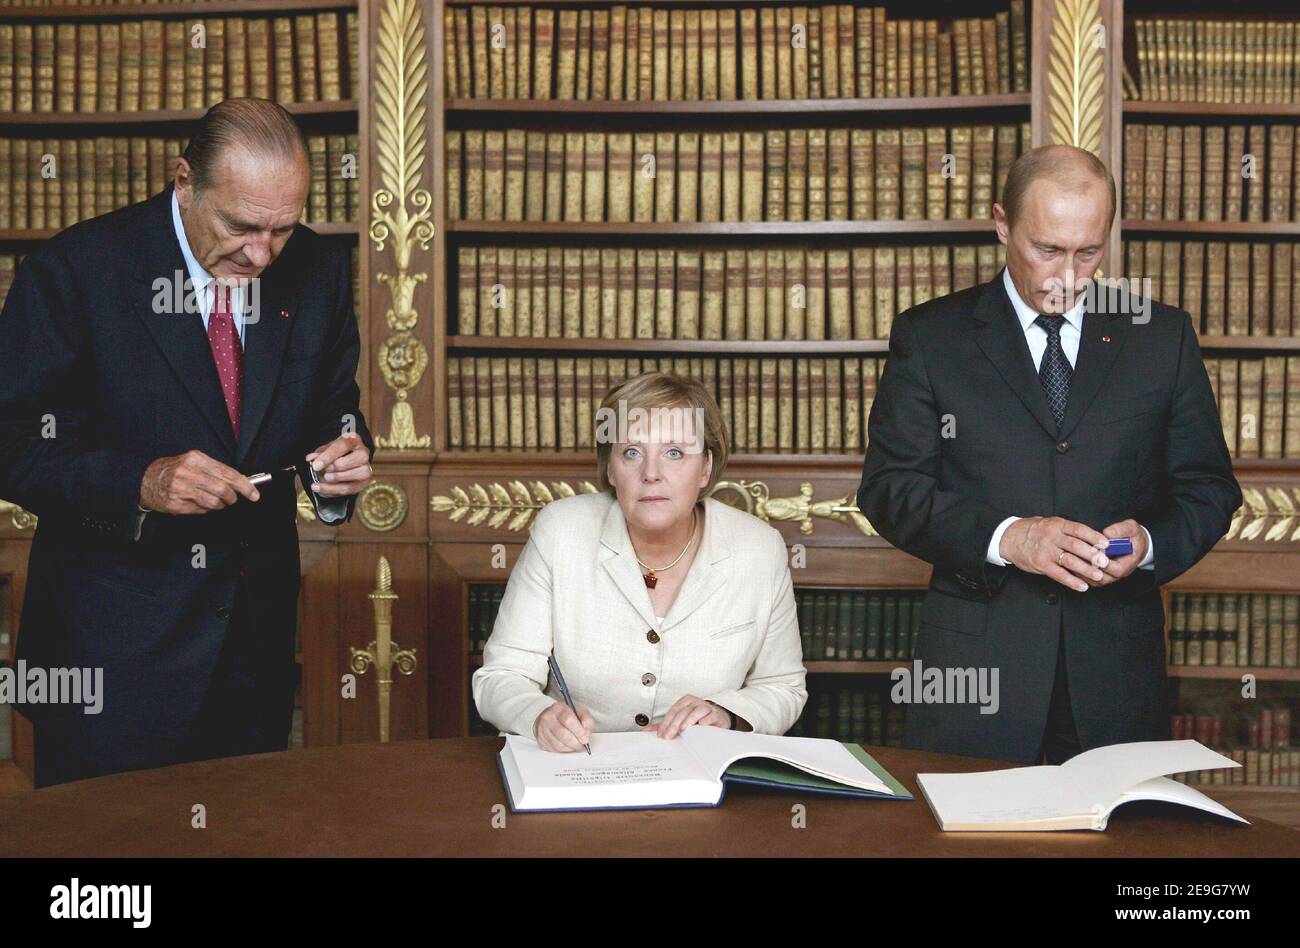 Germany's Chancellor Angela Merkel (c)signs the Livre d'Or (Guest Book) asRussia's President Vladimir Putin (R) and France's President Jacques Chirac watch to end a three-way summit in Compiegne, north of Paris, France on september 23, 2006. Photo pool by Romuald Meigneux/ABACAPRESS.COM Stock Photo